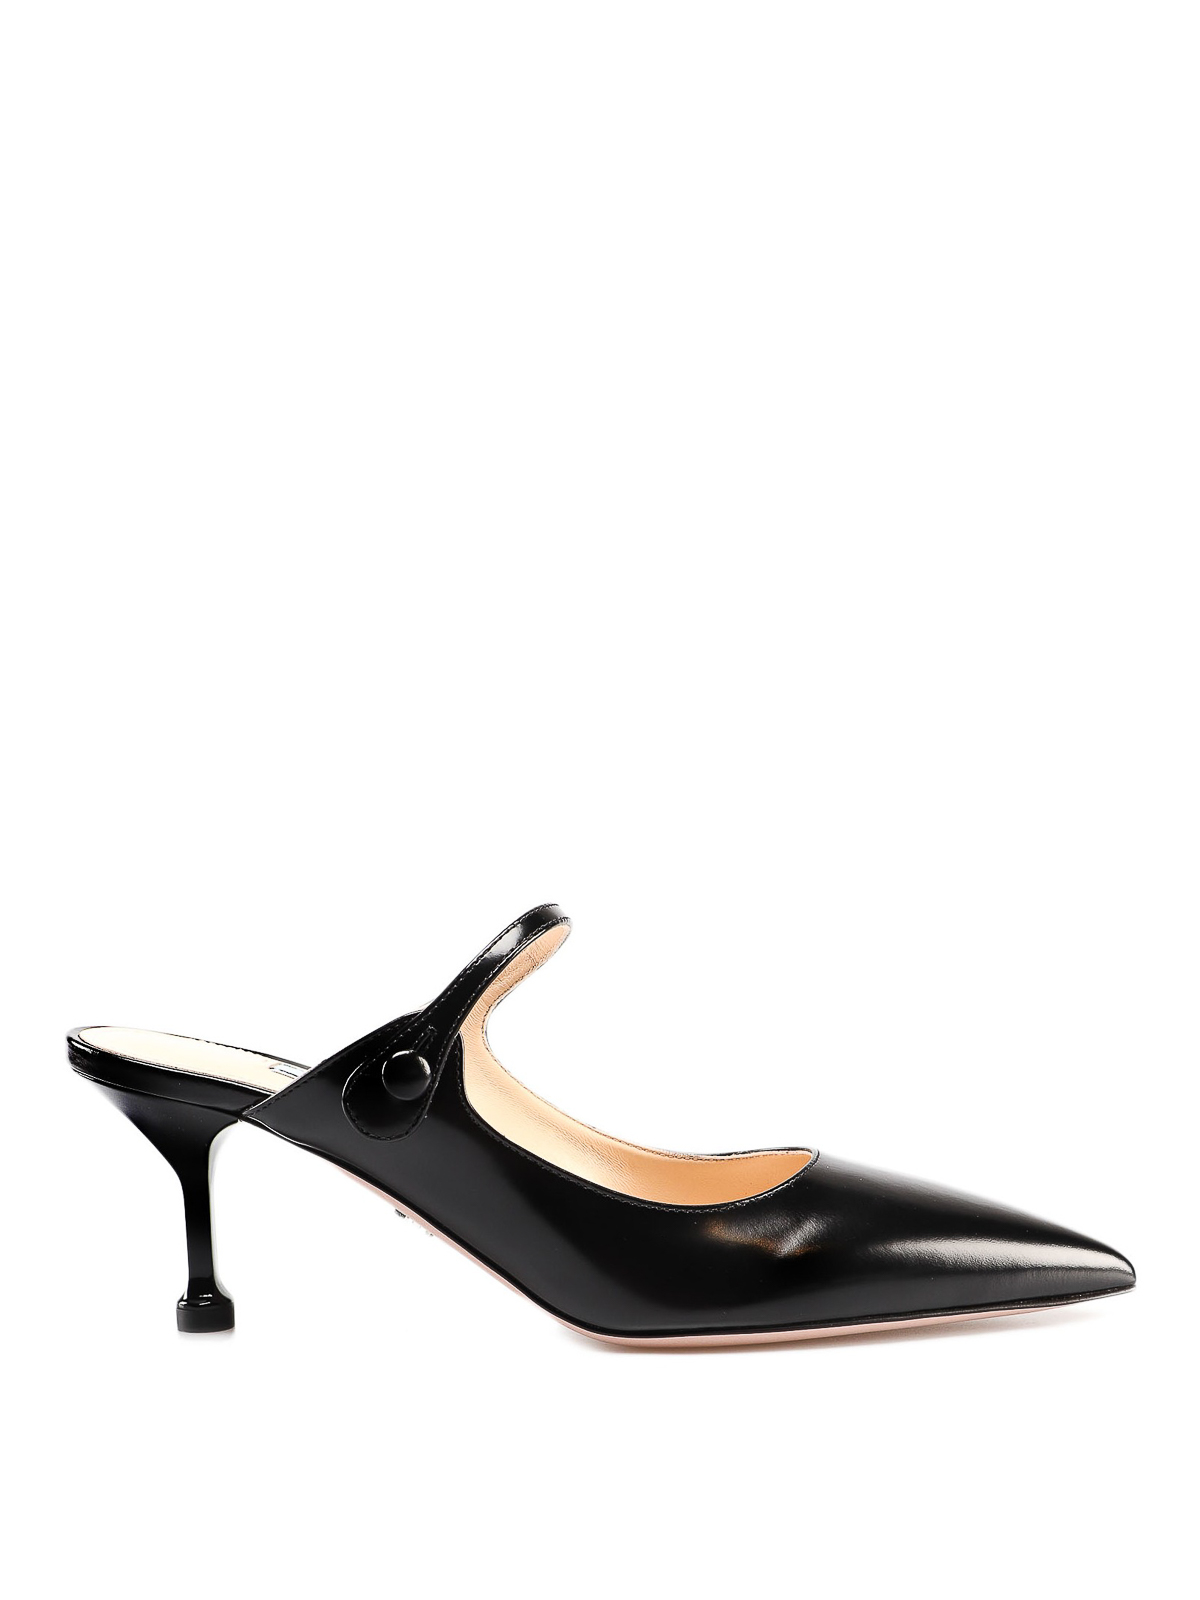 polished leather mules - mules shoes 